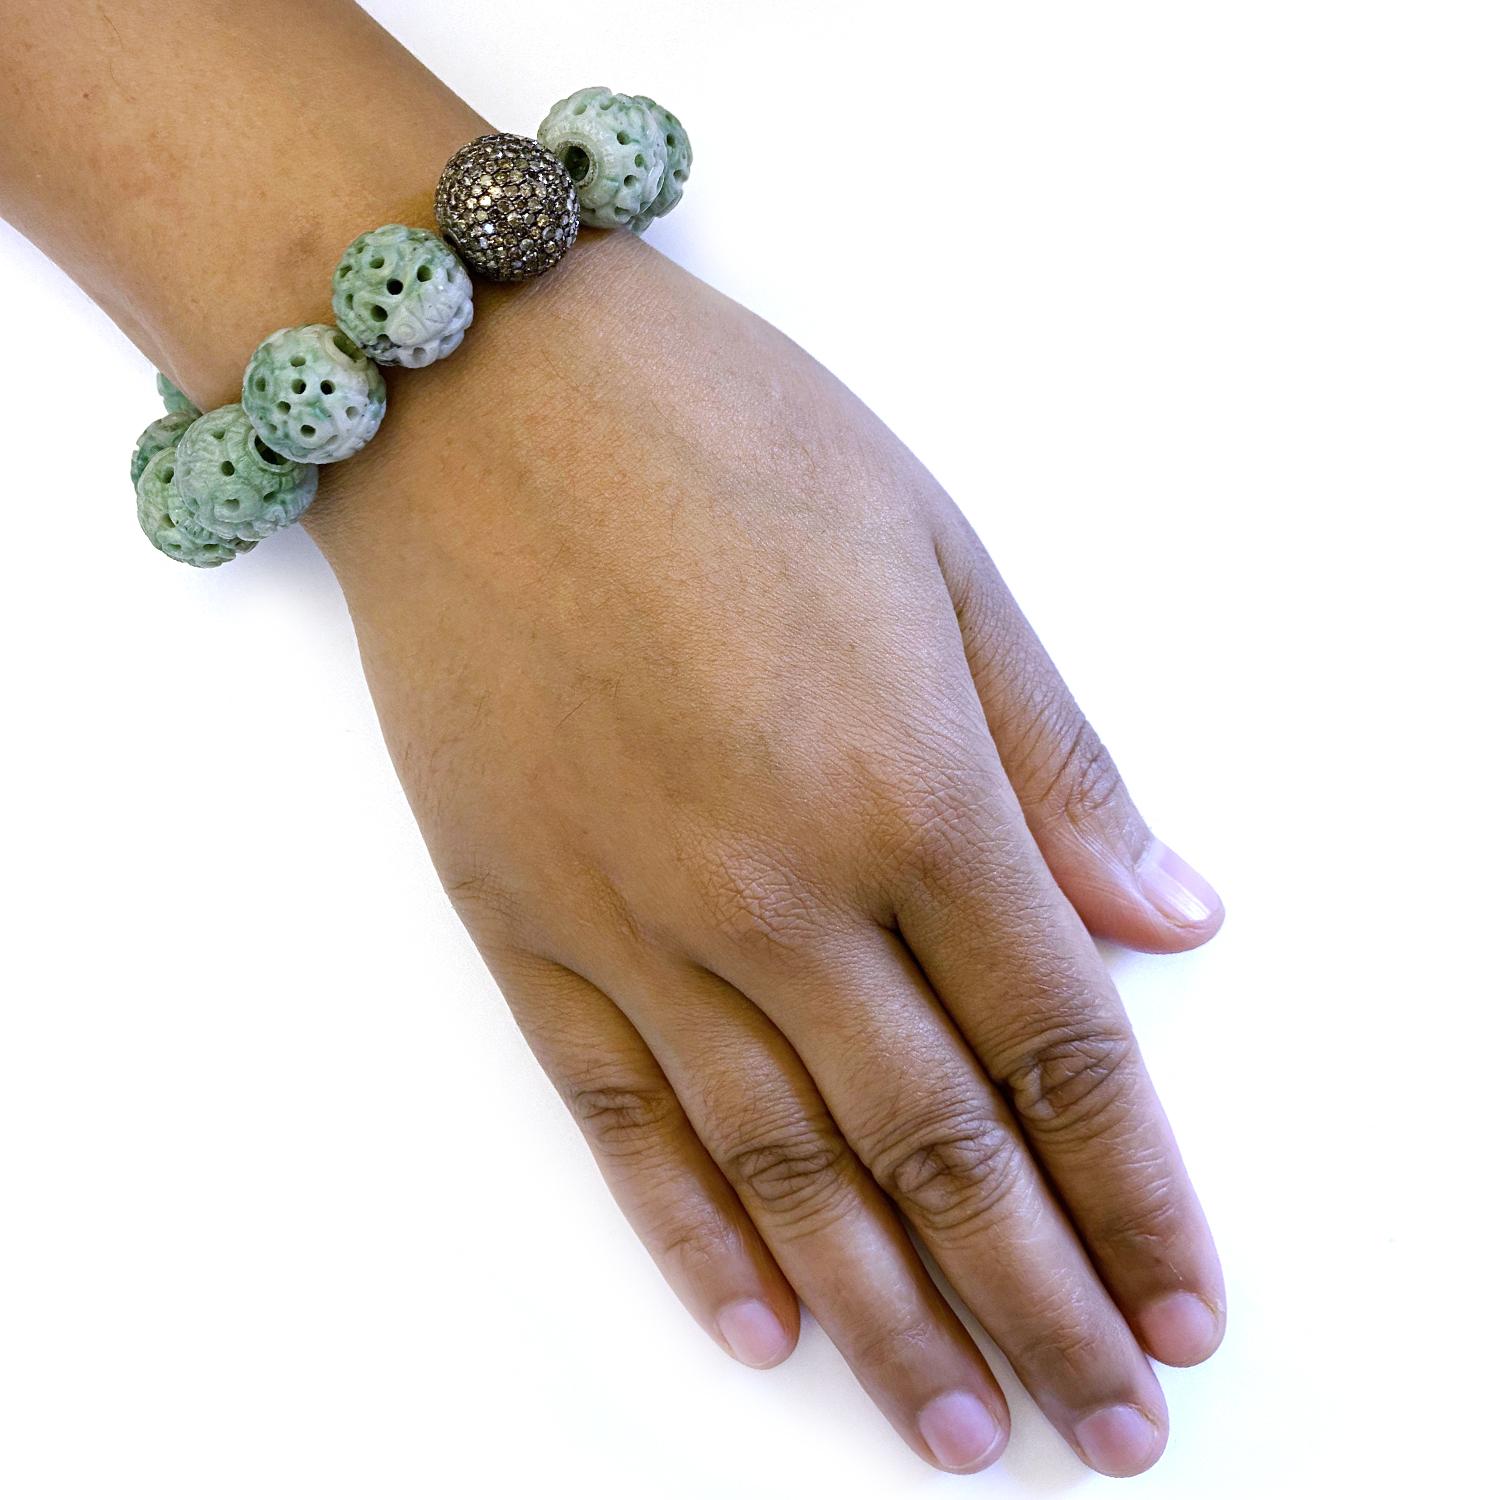 Silver:4.25g,
Diamond:4.39ct,
Green Jade: 225cts
Size: 16 MM